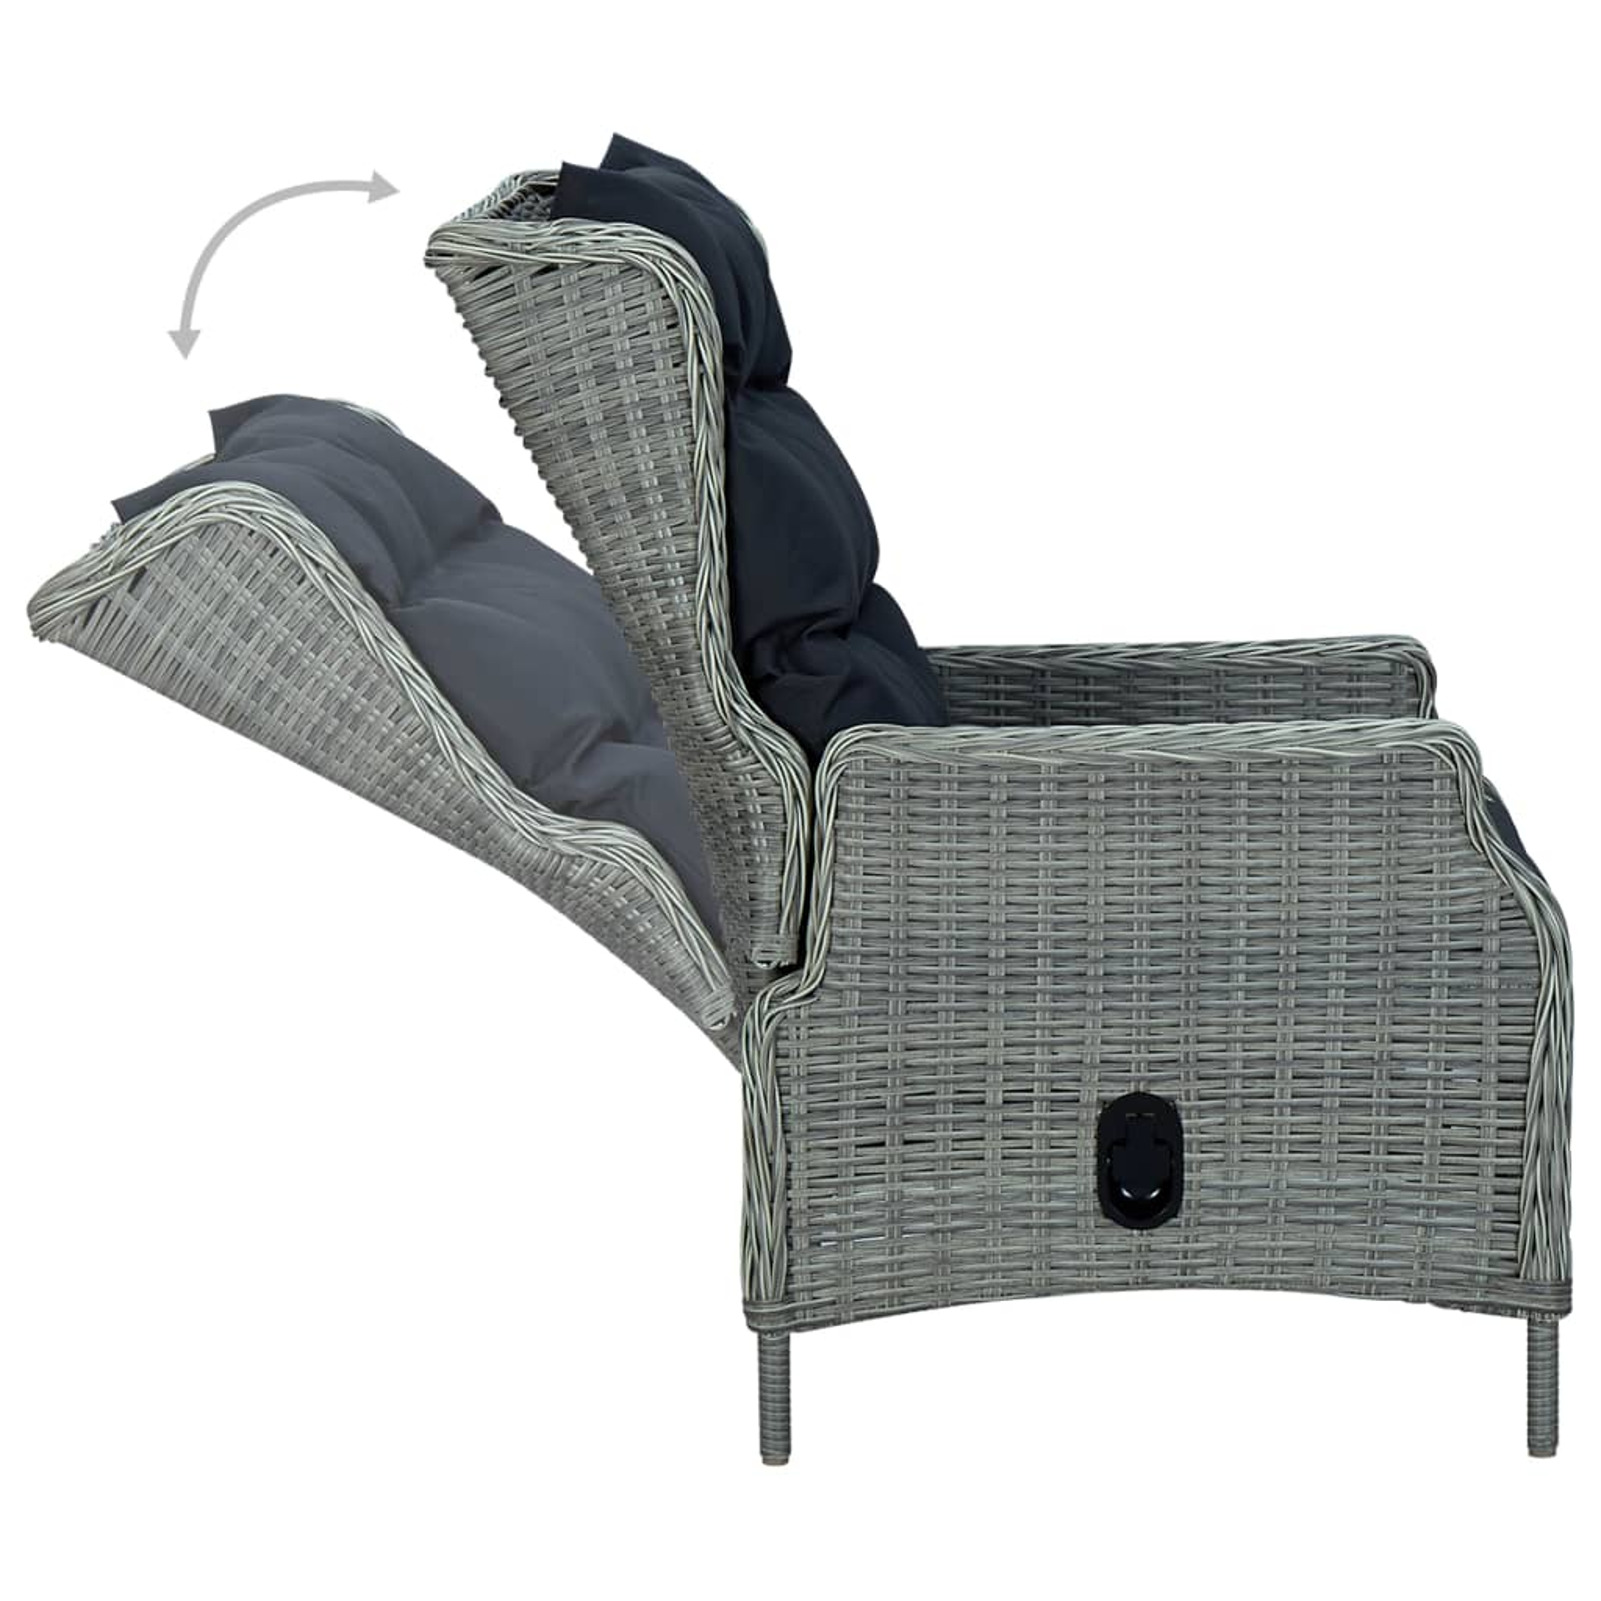 Suzicca Reclining Patio Chair with Cushions Poly Rattan Gray - image 4 of 7